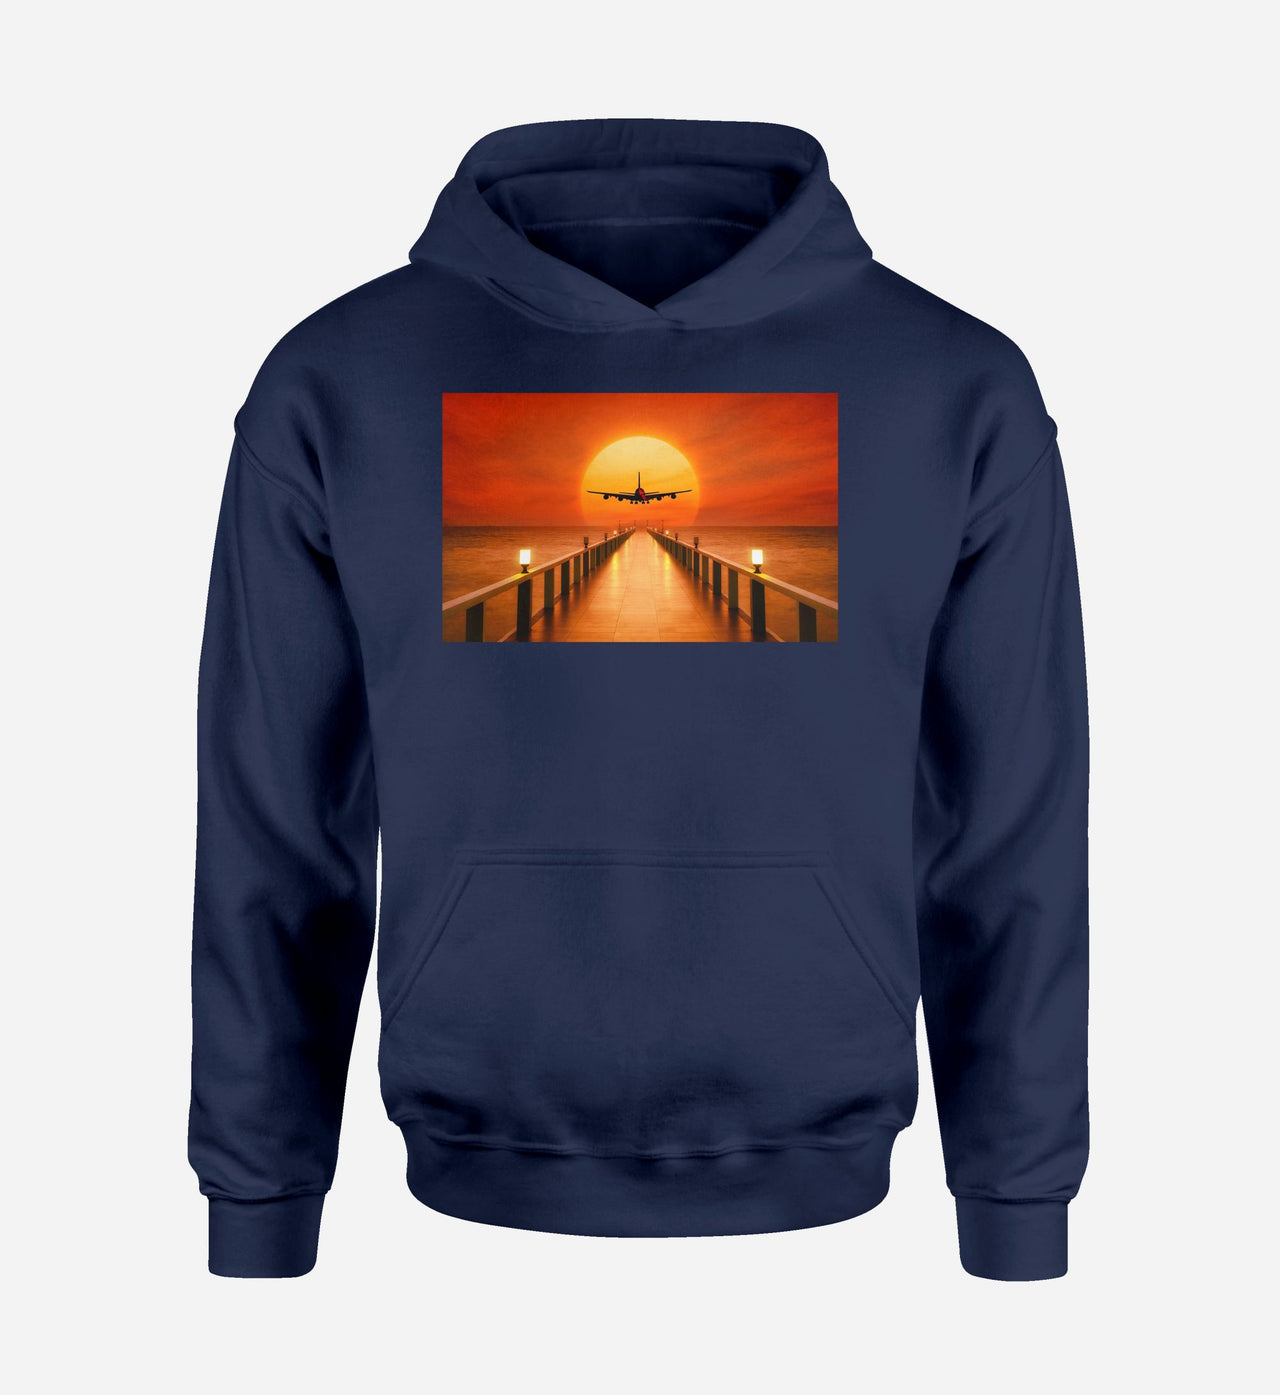 Airbus A380 Towards Sunset Designed Hoodies